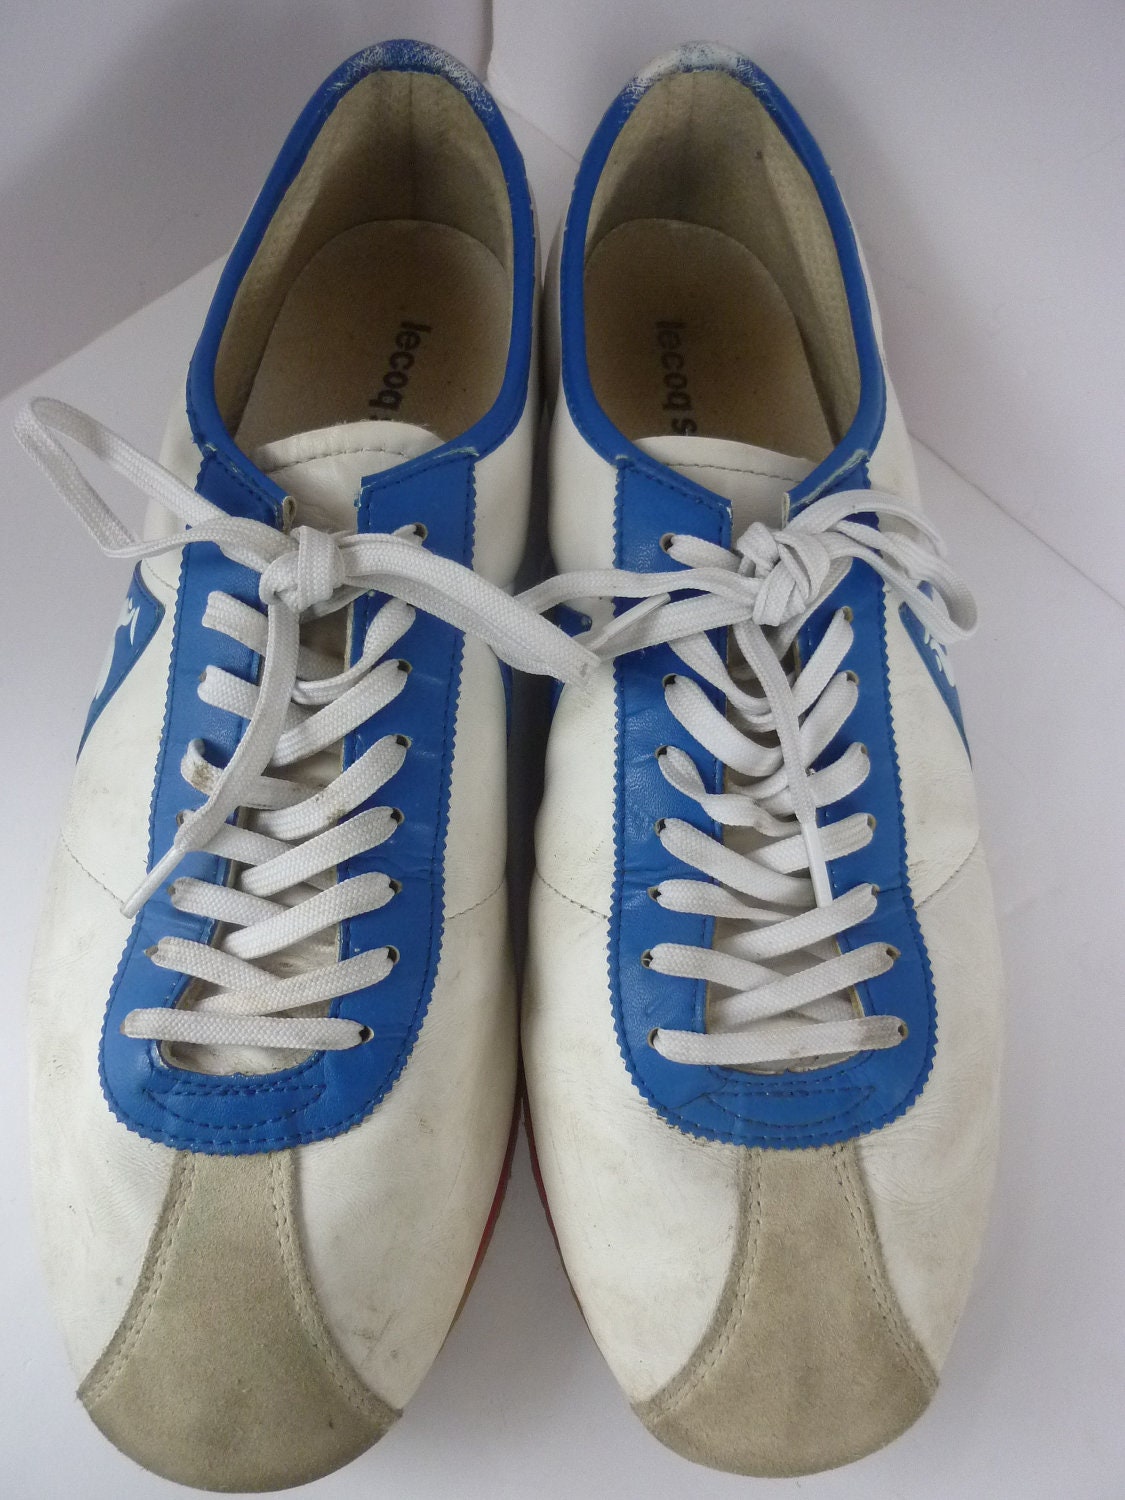 REDUCED 1980s Athletic Shoes by Le Coq Sportif Mens Size 10